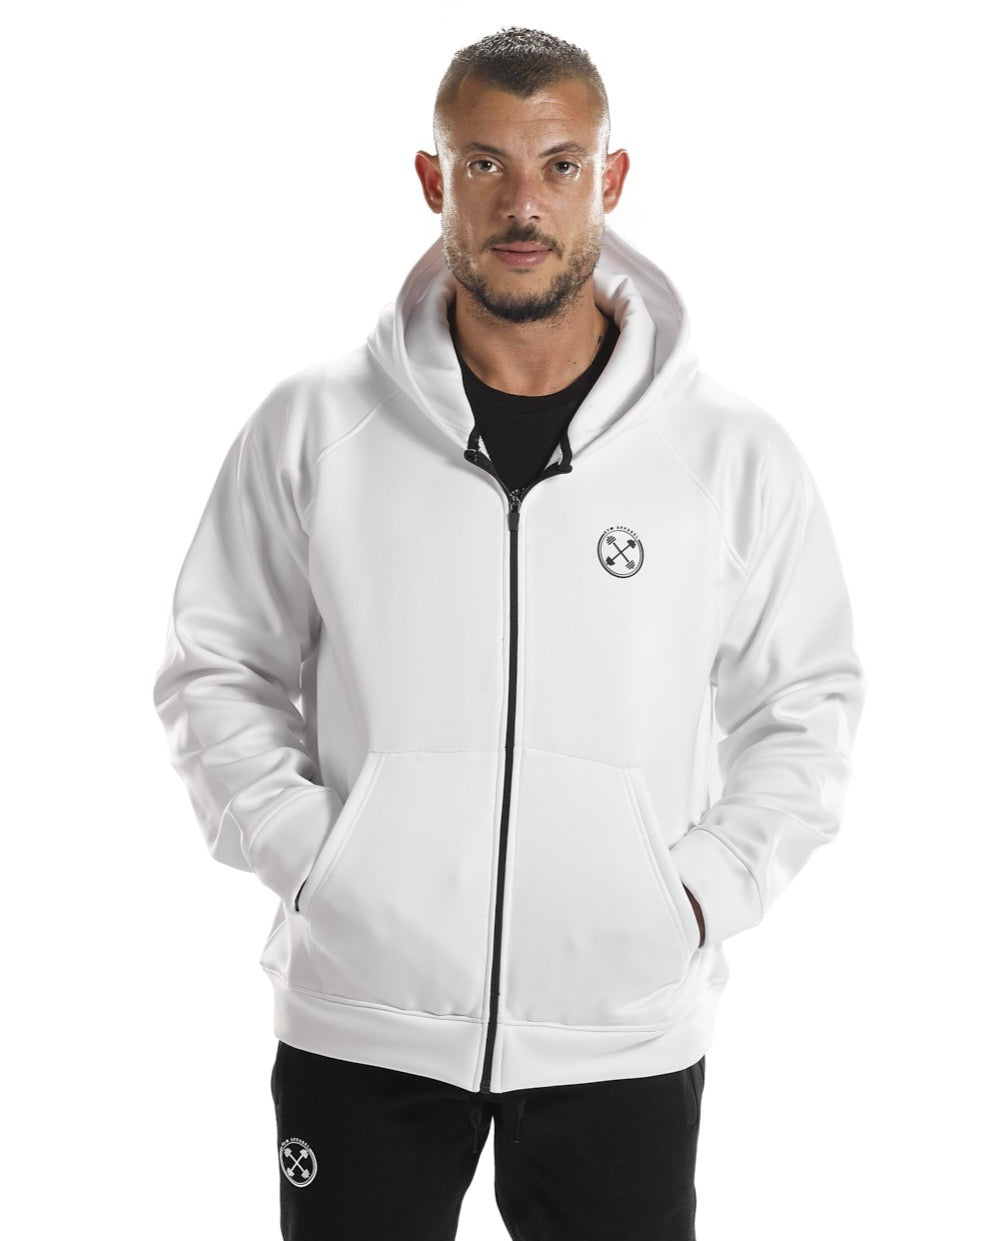 ULTRA Warm Up Oversized Zipper Jacket [Limited Quantities] - Hoodie - Gym Apparel Egypt